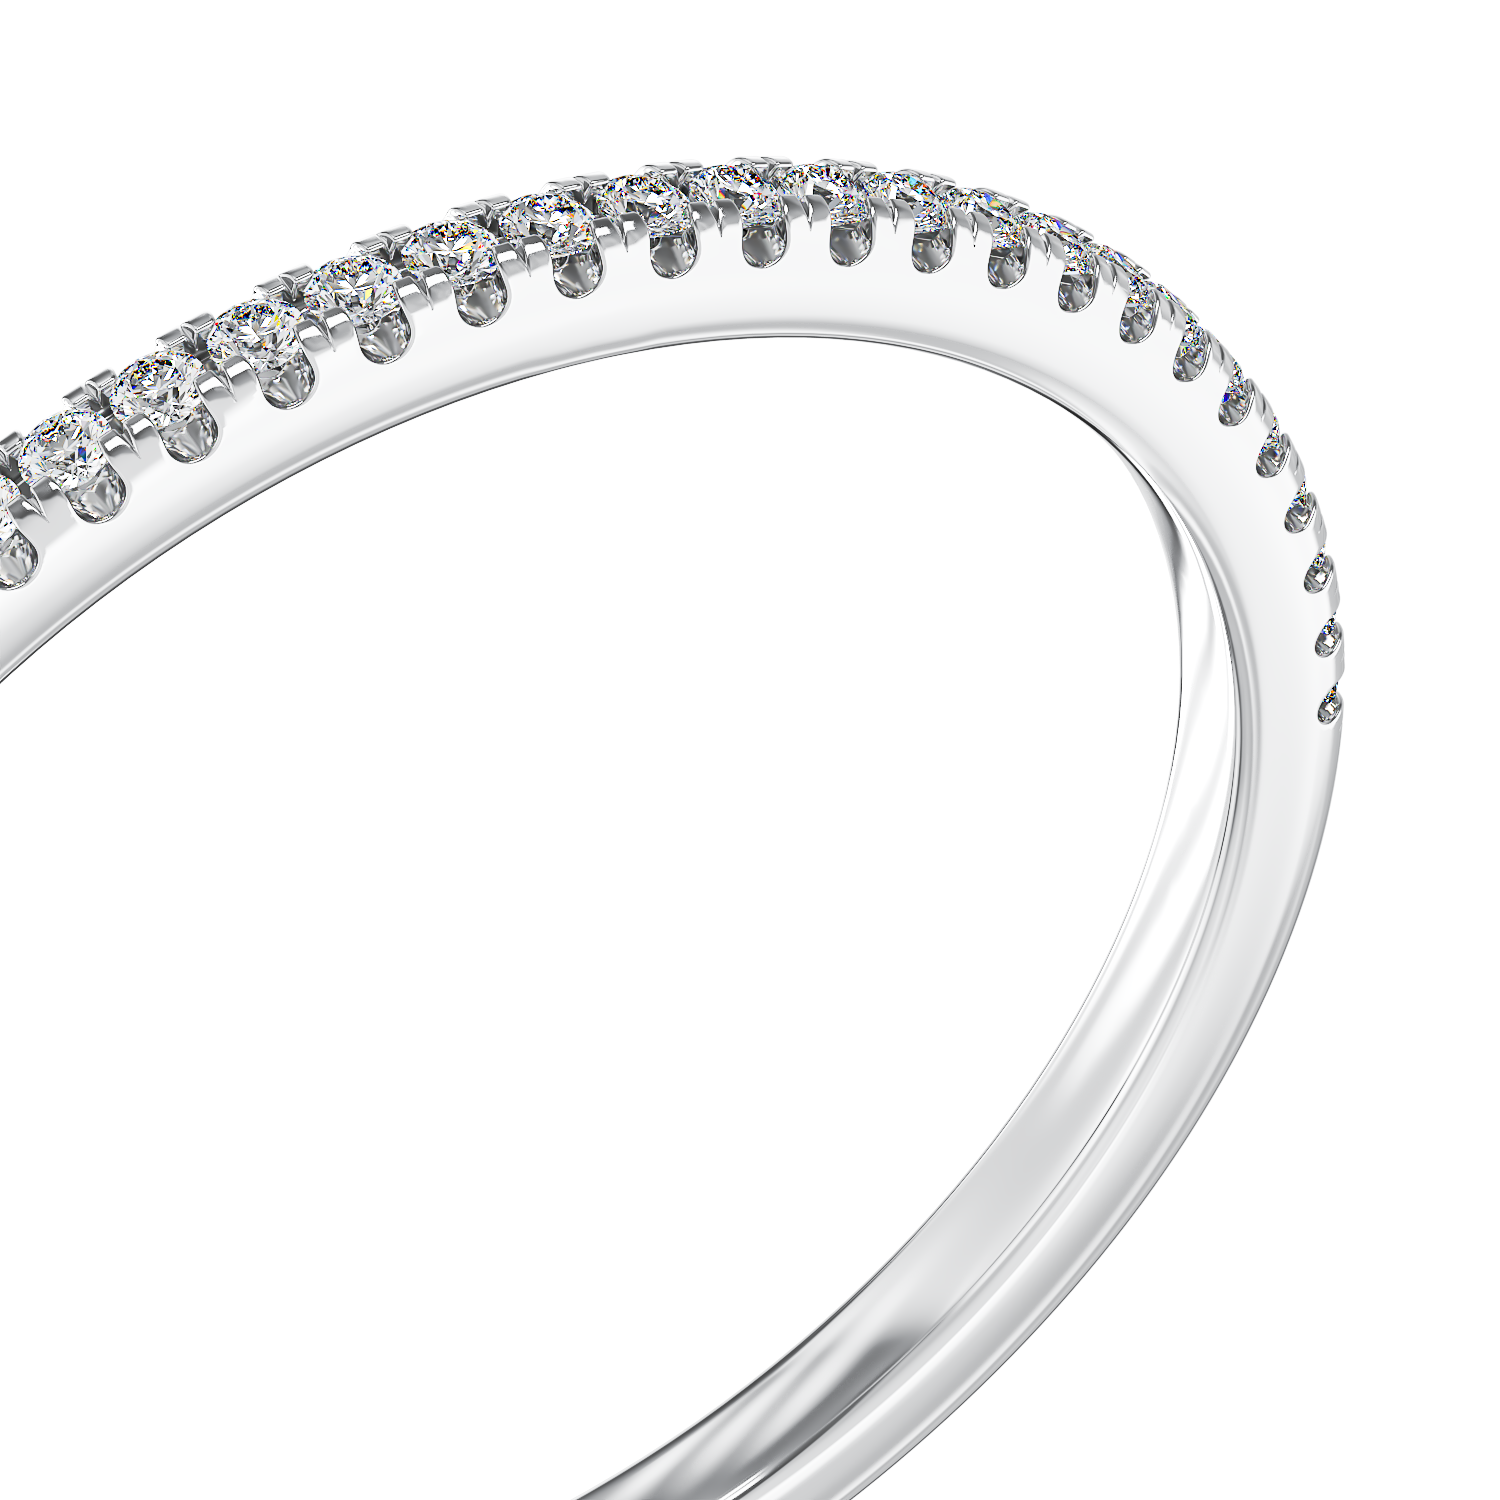 Half eternity ring in white gold with 0.07ct diamonds